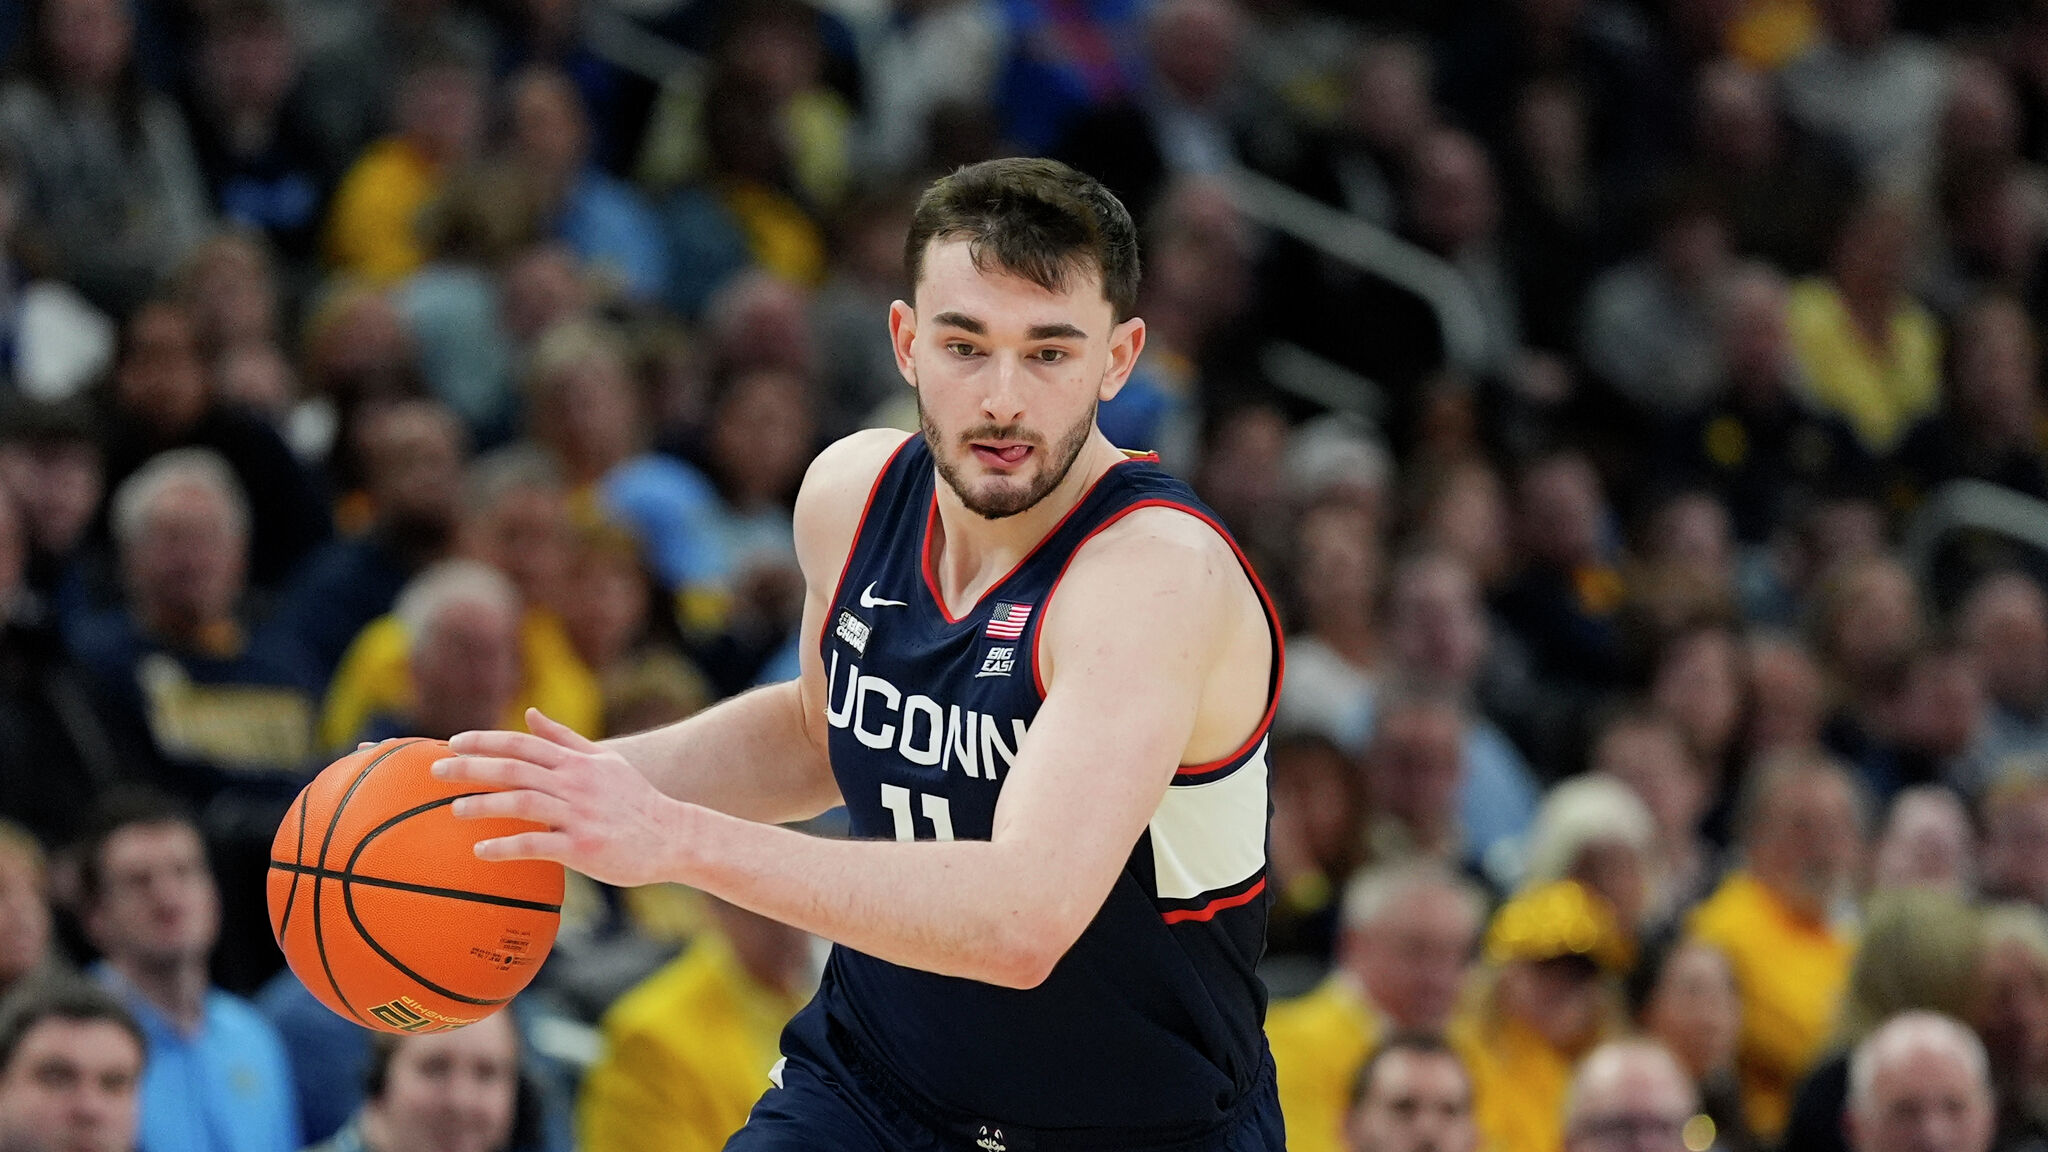 Alex Karaban choosing UConn over the NBA Draft, a momentous decision for both his career and the team's future.